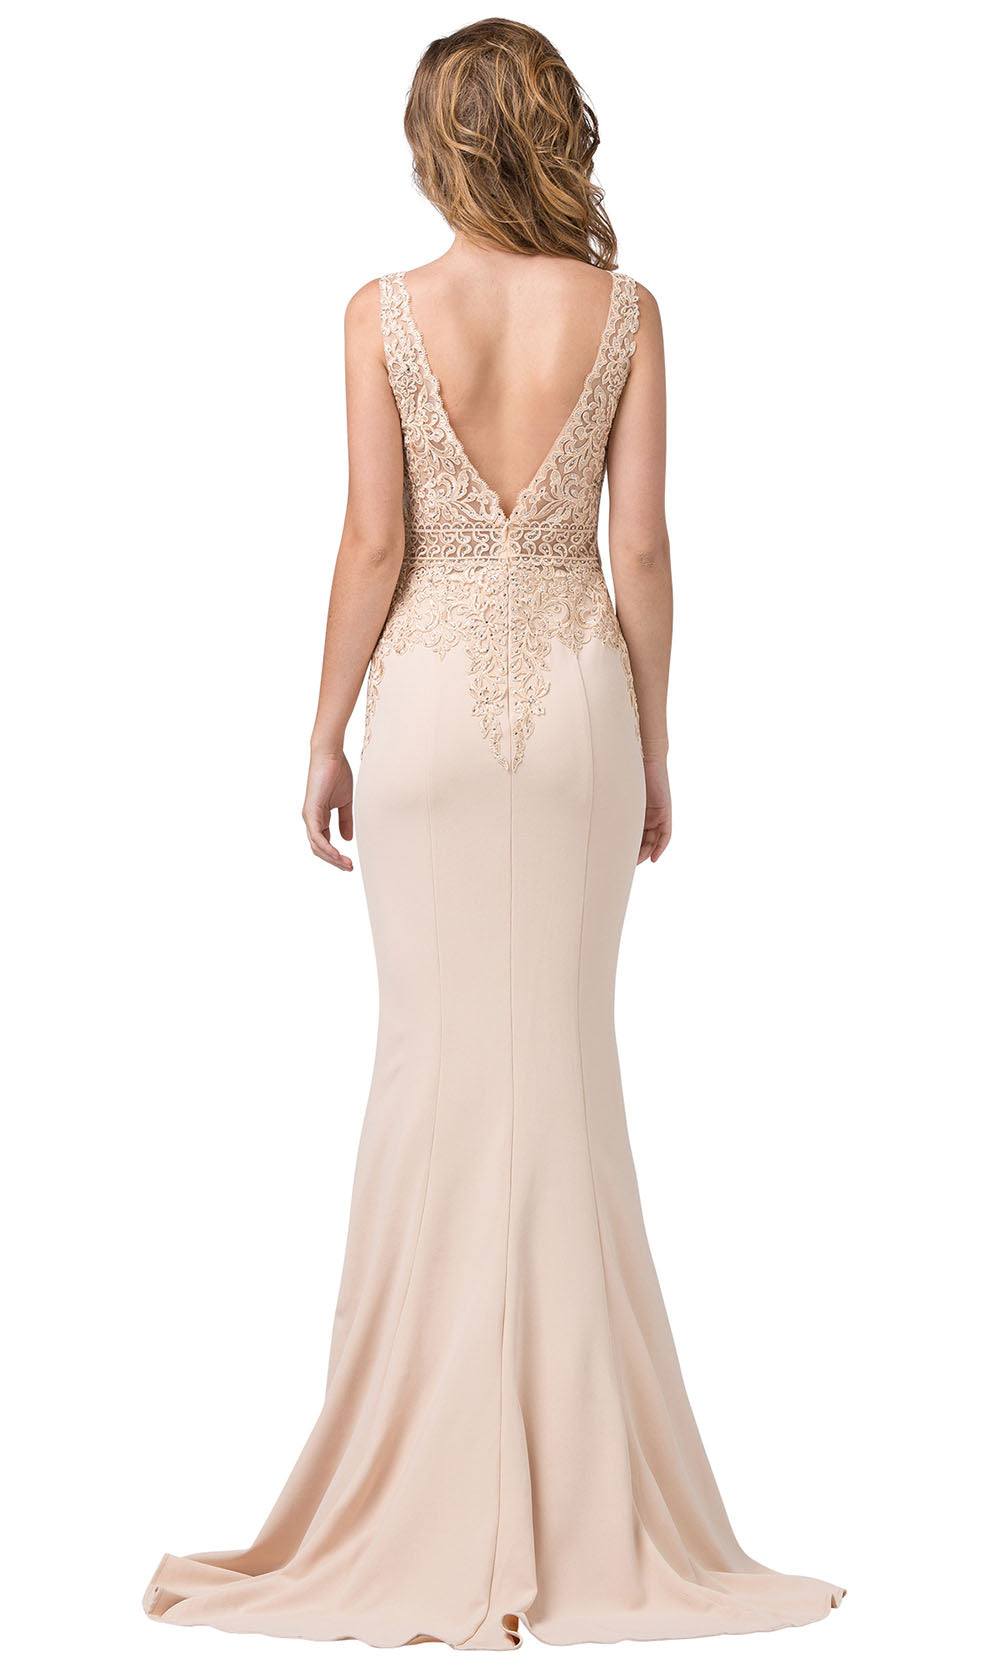 Dancing Queen - 2392 Sleeveless Beaded Lace Bodice Evening Dress In Champagne & Gold